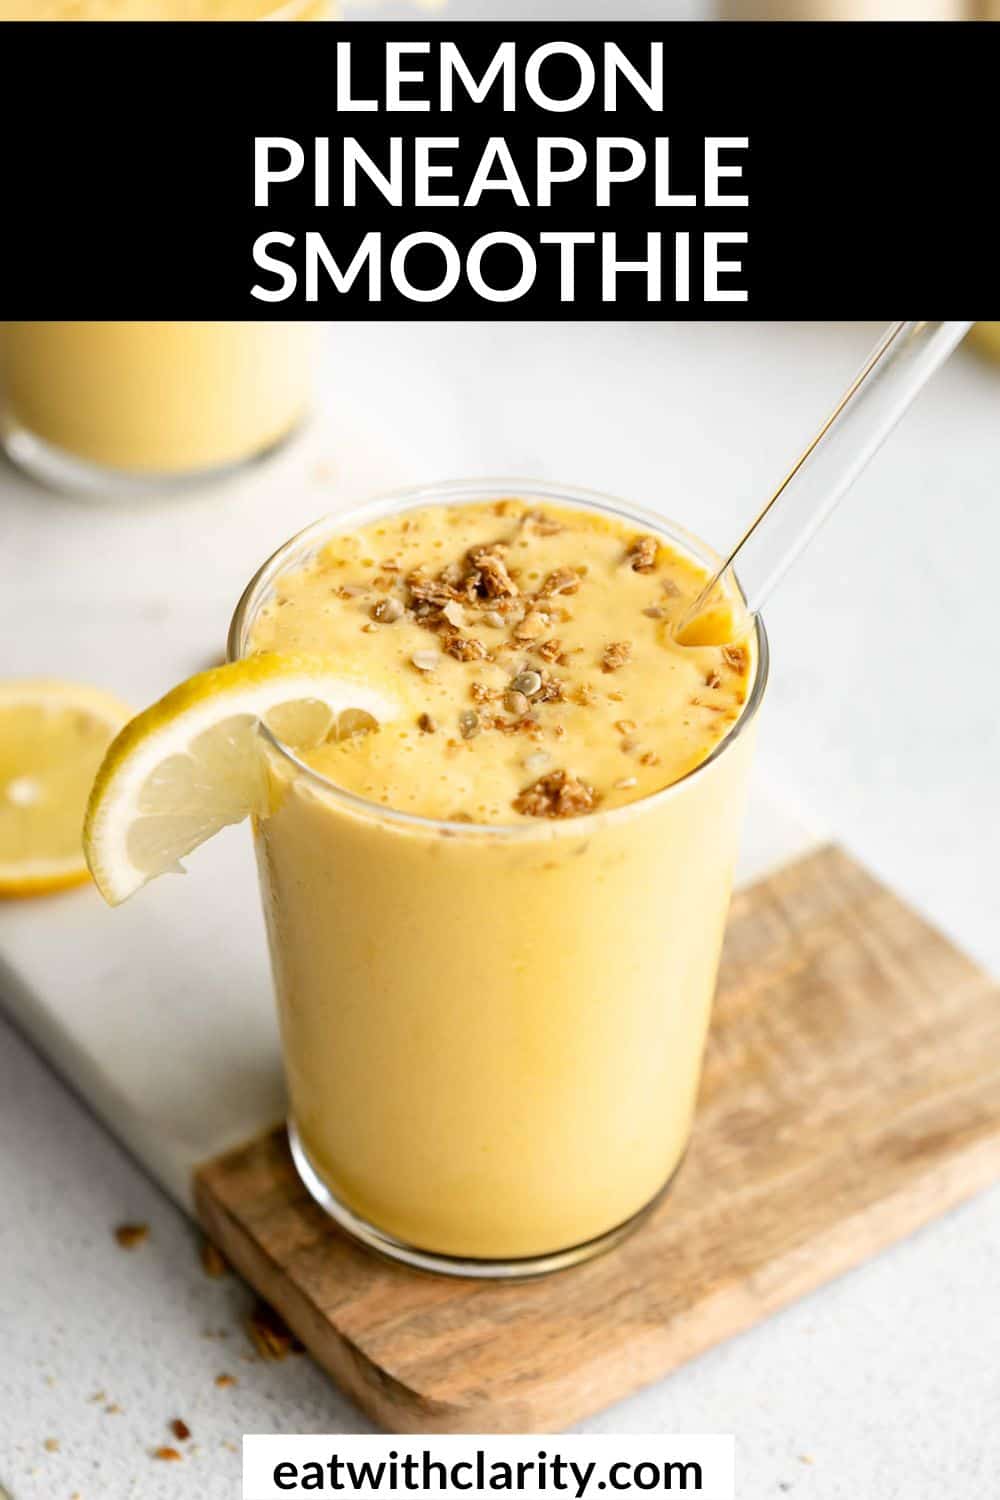 Lemon Pineapple Smoothie - Eat With Clarity